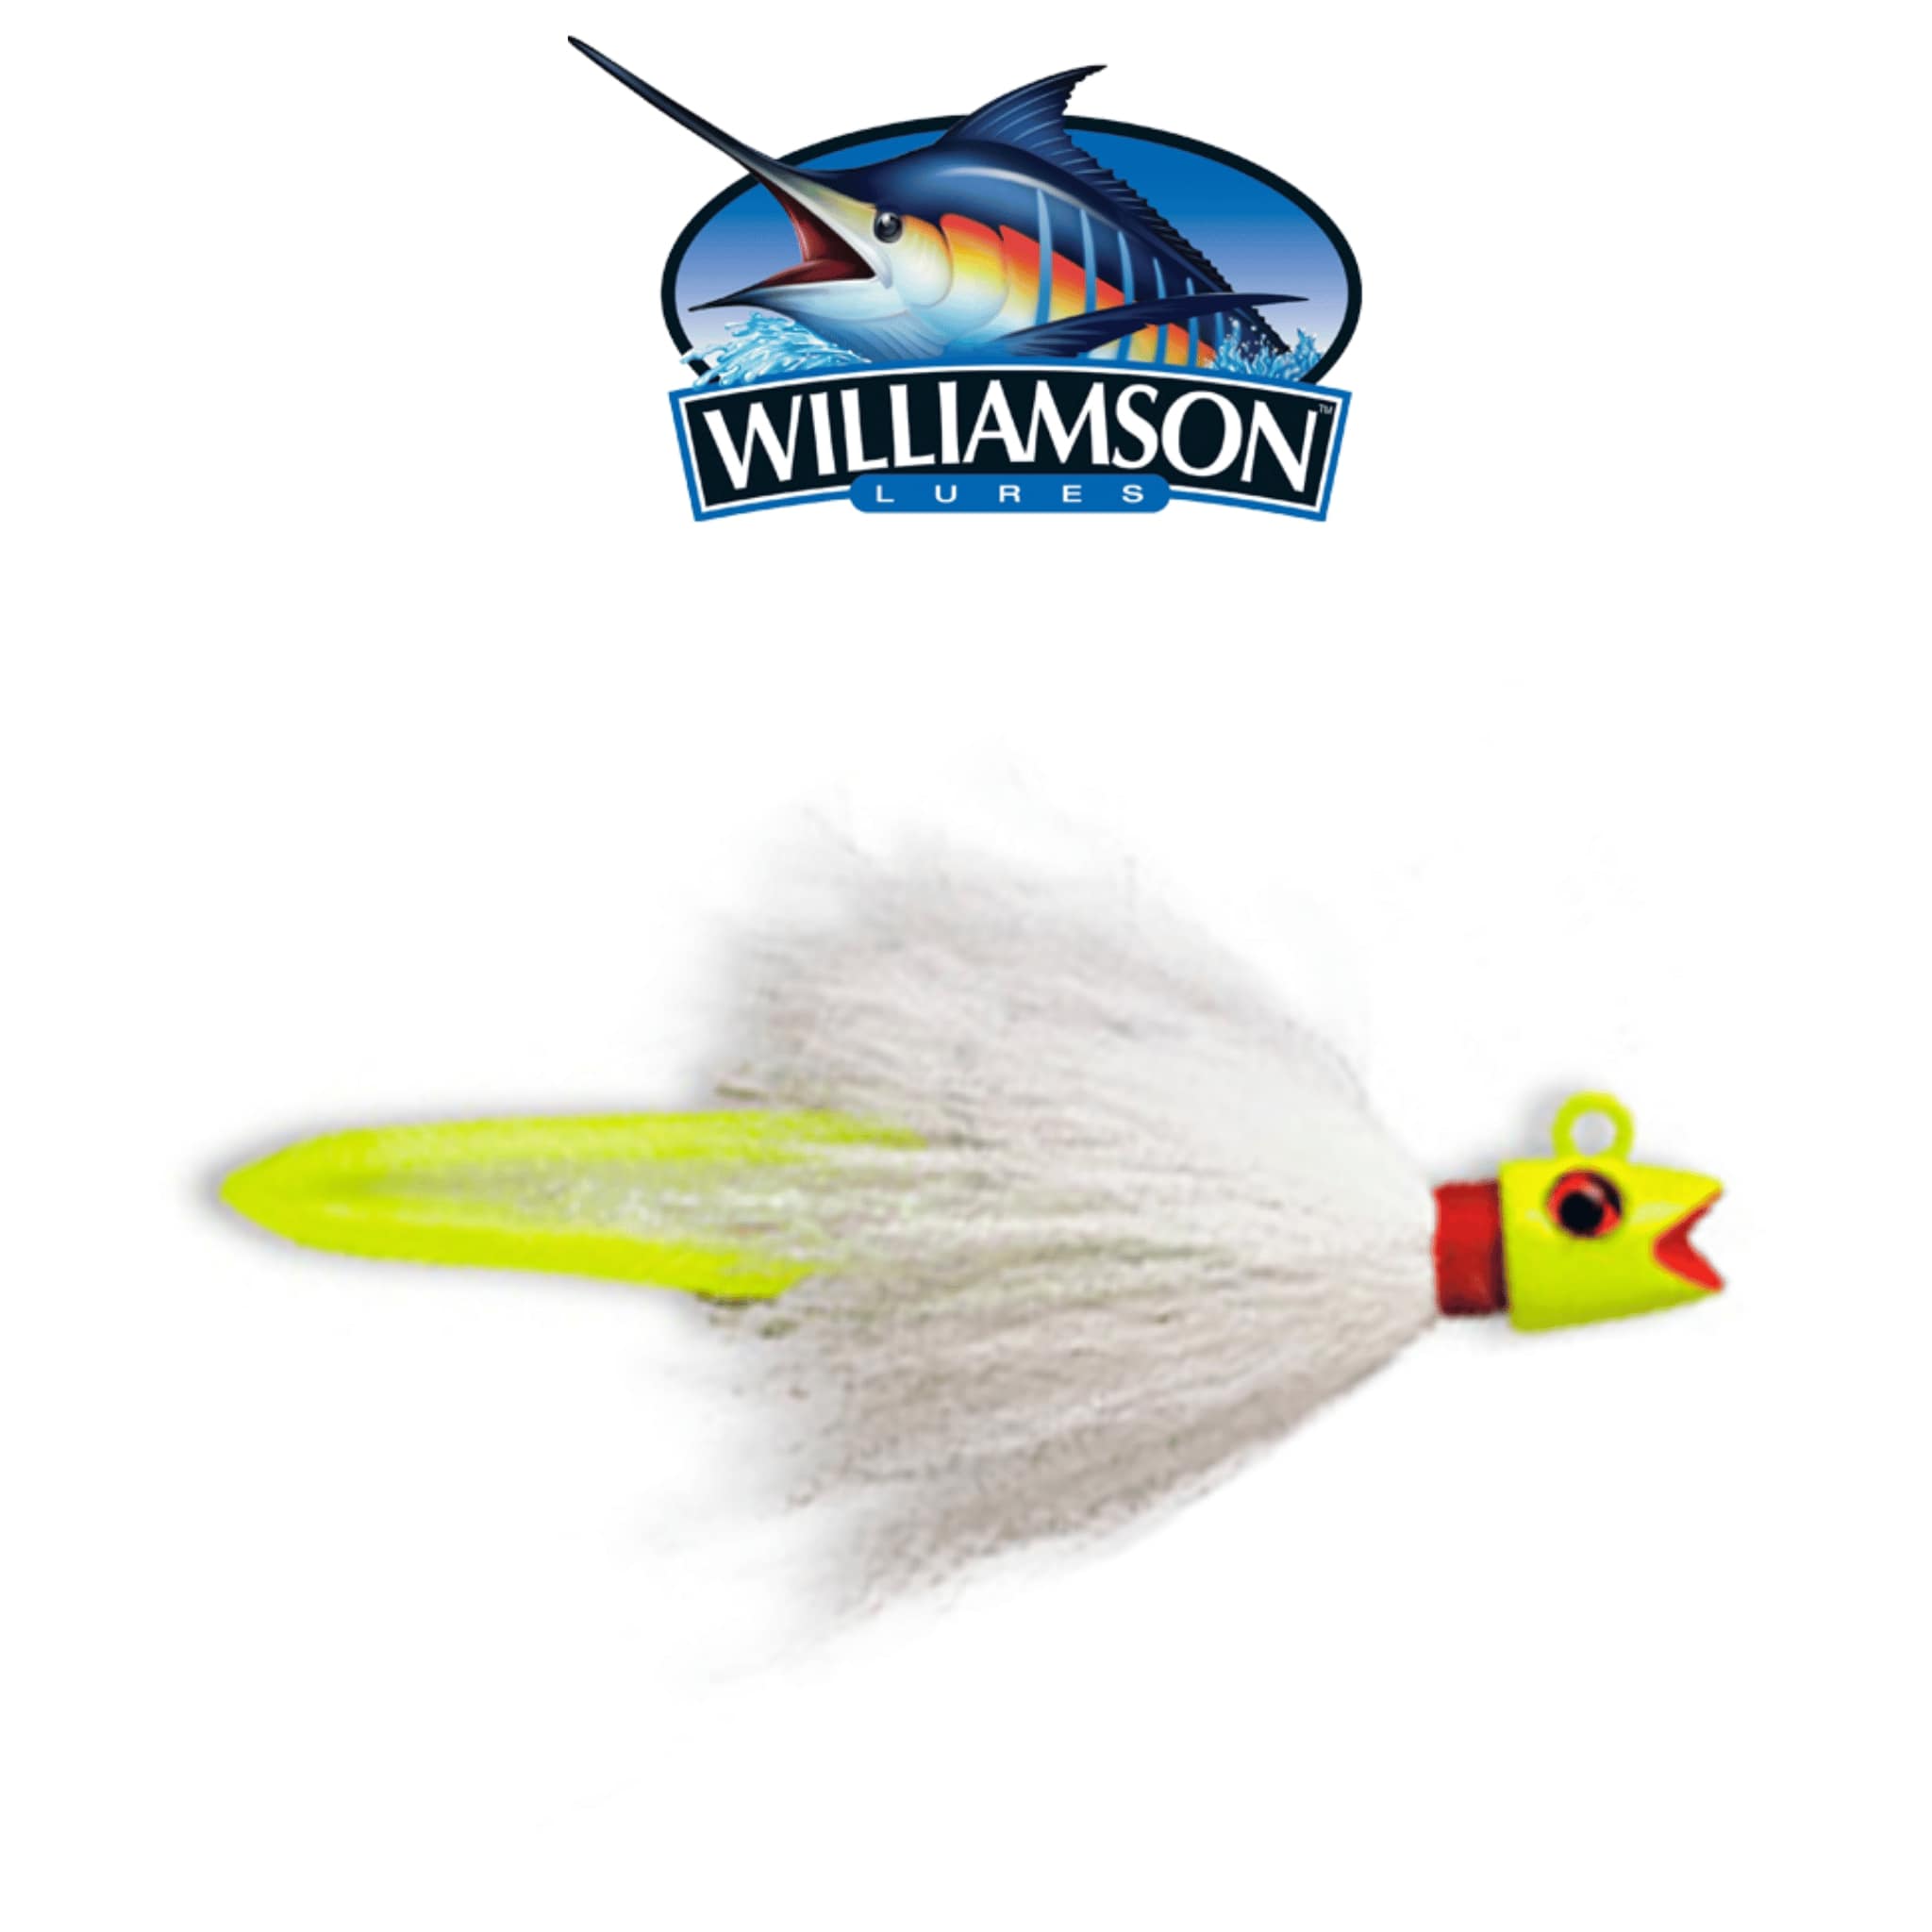 Williamson Hot Lips Bucktail Jig Fishing Hook Lure, 1/4 oz Green w/ White Feathers